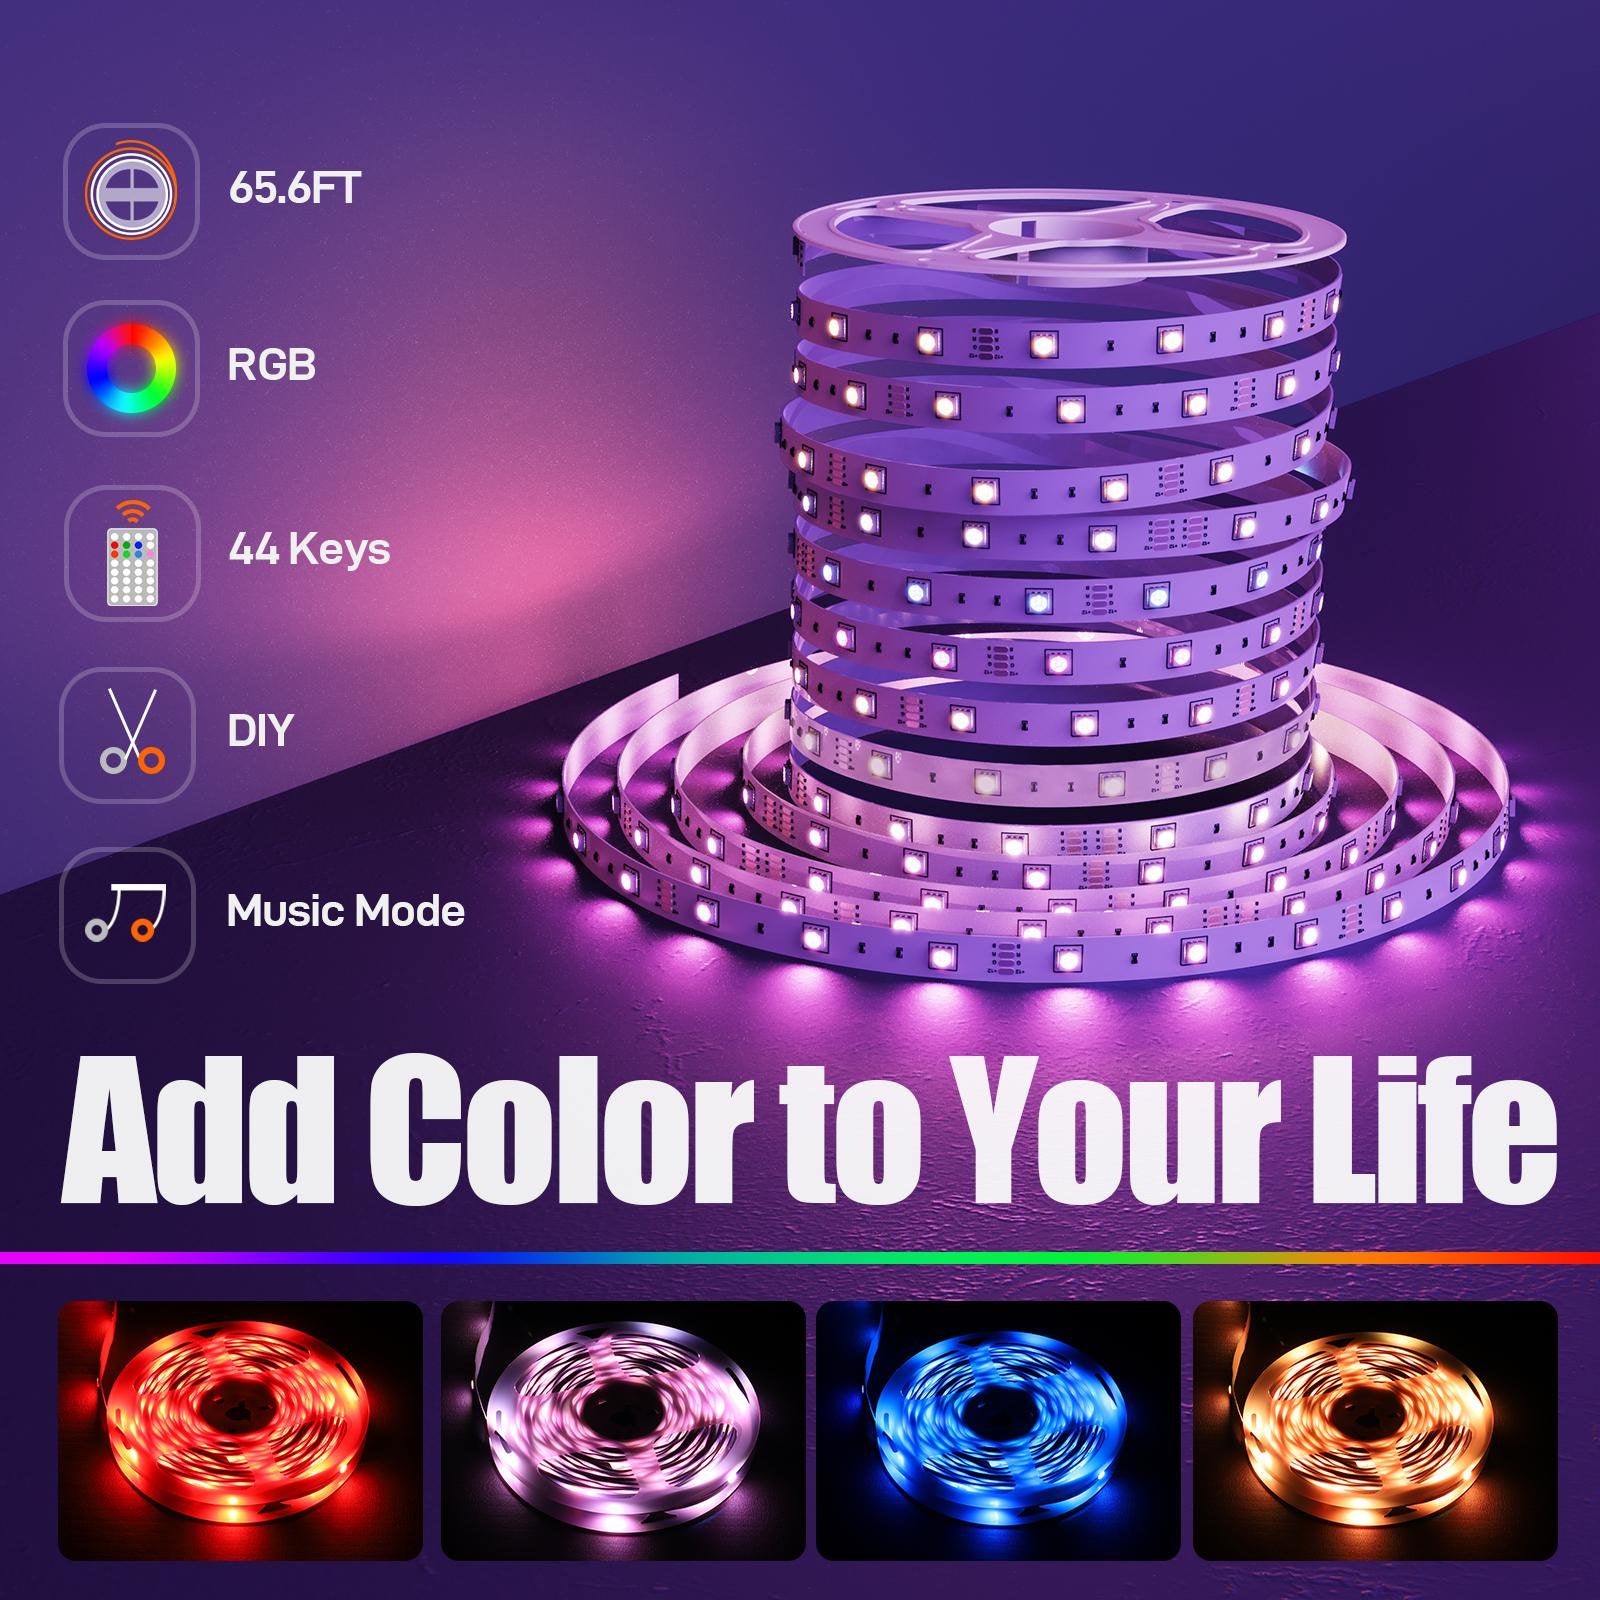 LAIGHTER 65.6ft LED Strip Lights, Ultra Long Music Sync RGB 5050 Color Changing LED Music TV Strips Kit with 44 Keys IR Remote and Fixing Clips, for Bedroom Kitchen Home Party Bar Car Xmas Rope Lights Decor